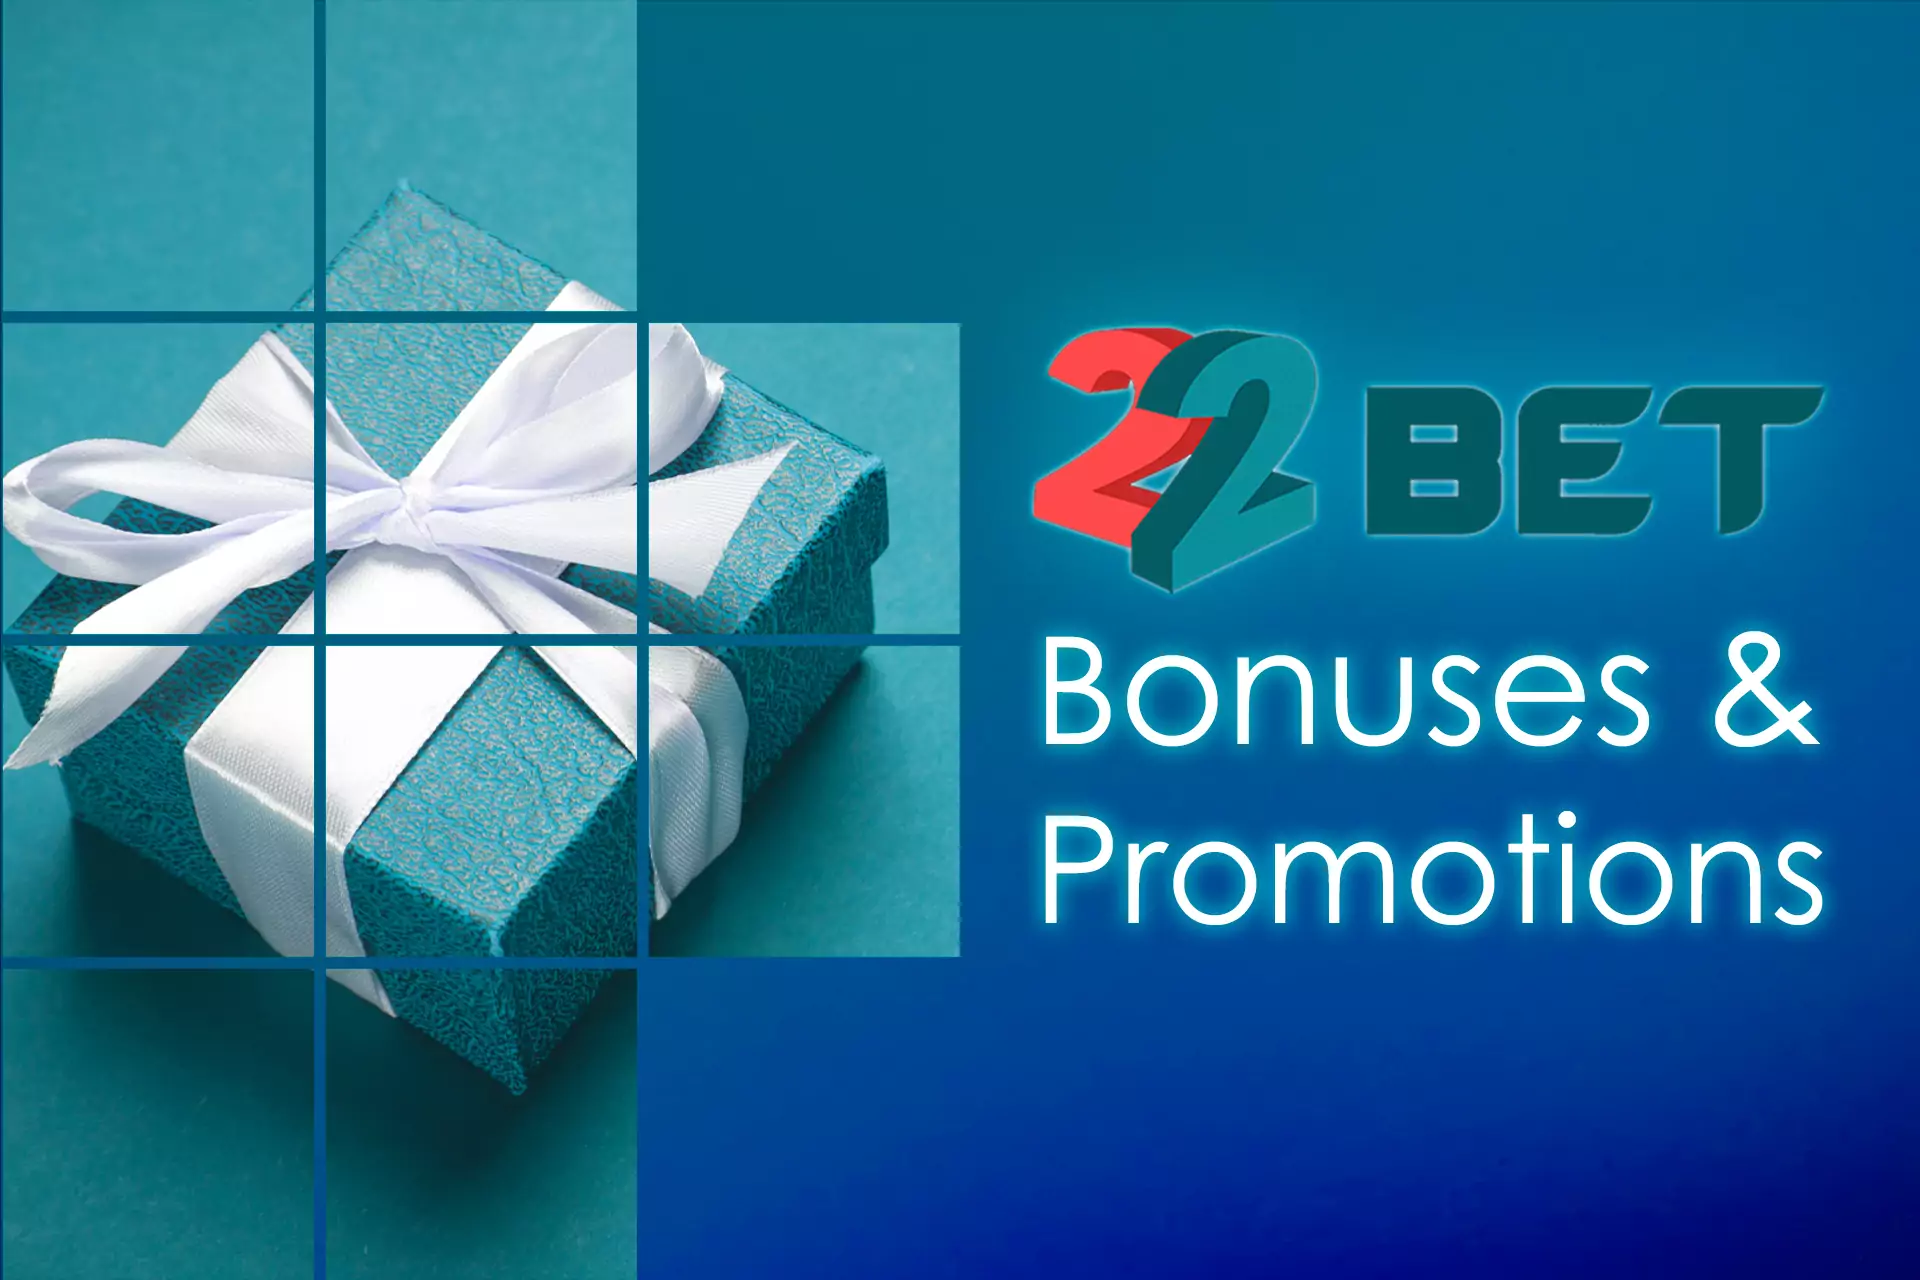 After you get the bonus on your first deposit, check the rules of other promotional offers.